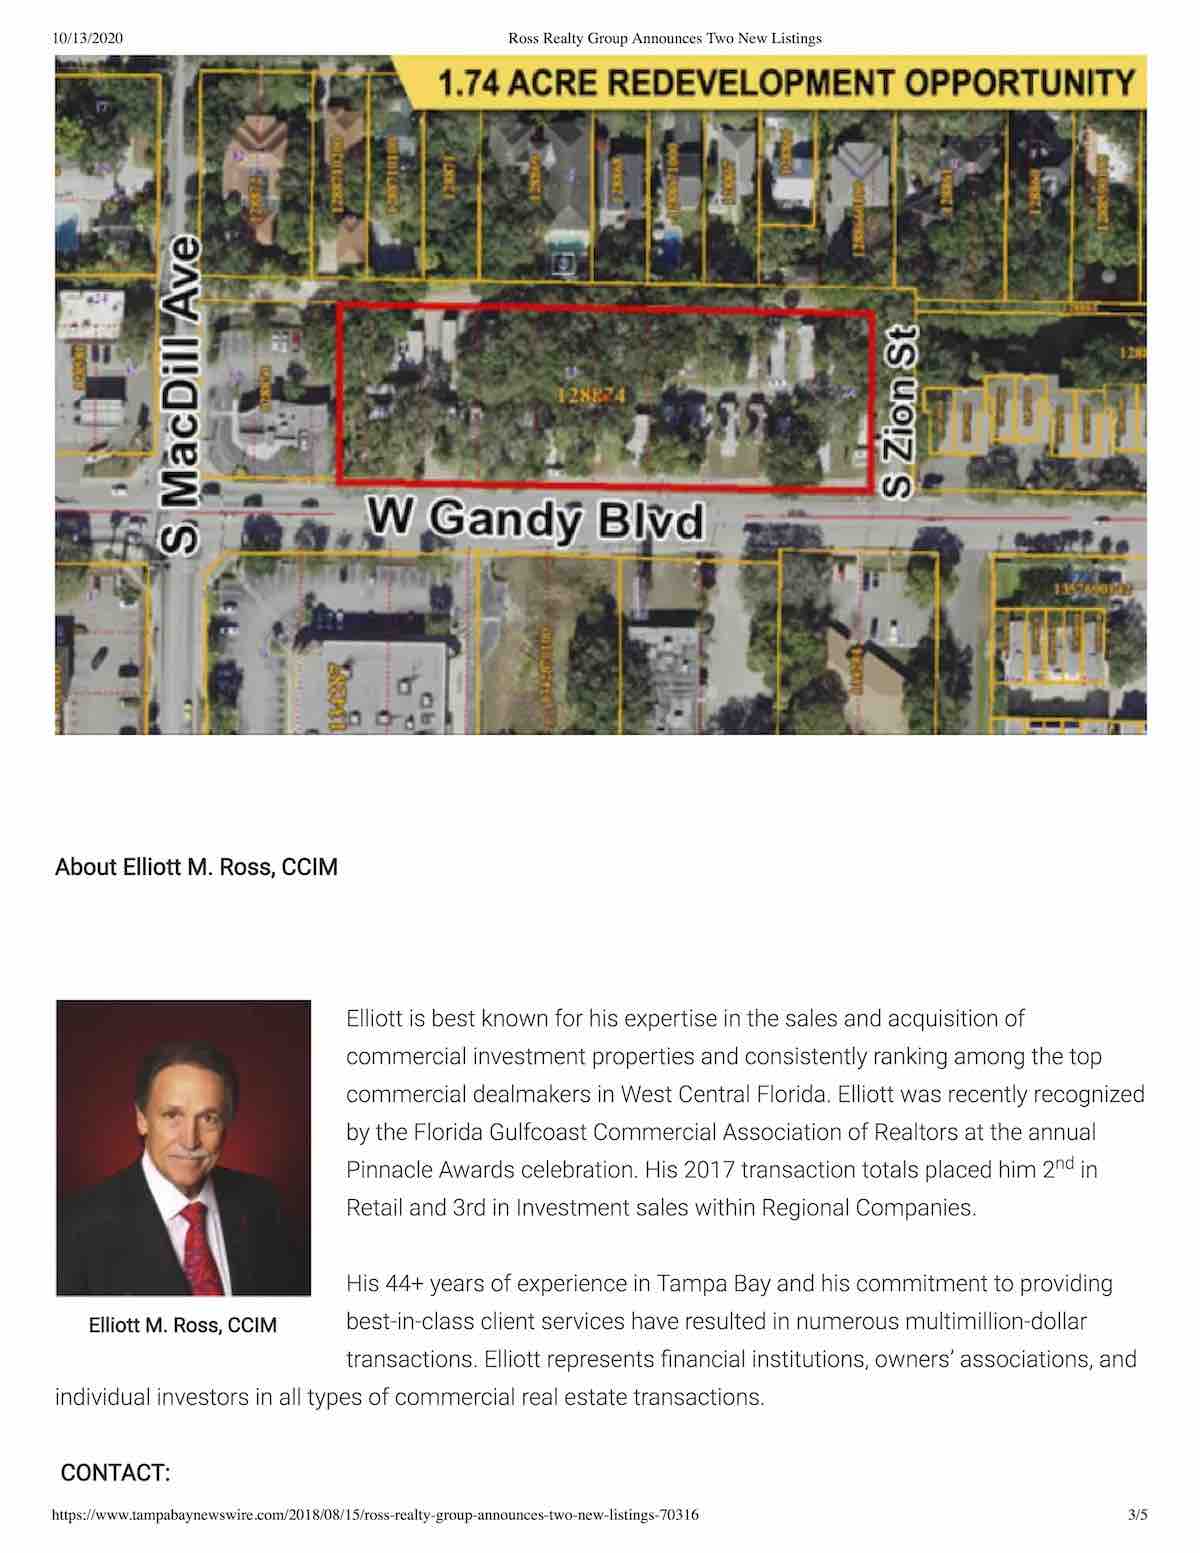 Tampa Commercial Real Estate - Ross Realty Group Announces Two New Listings P2